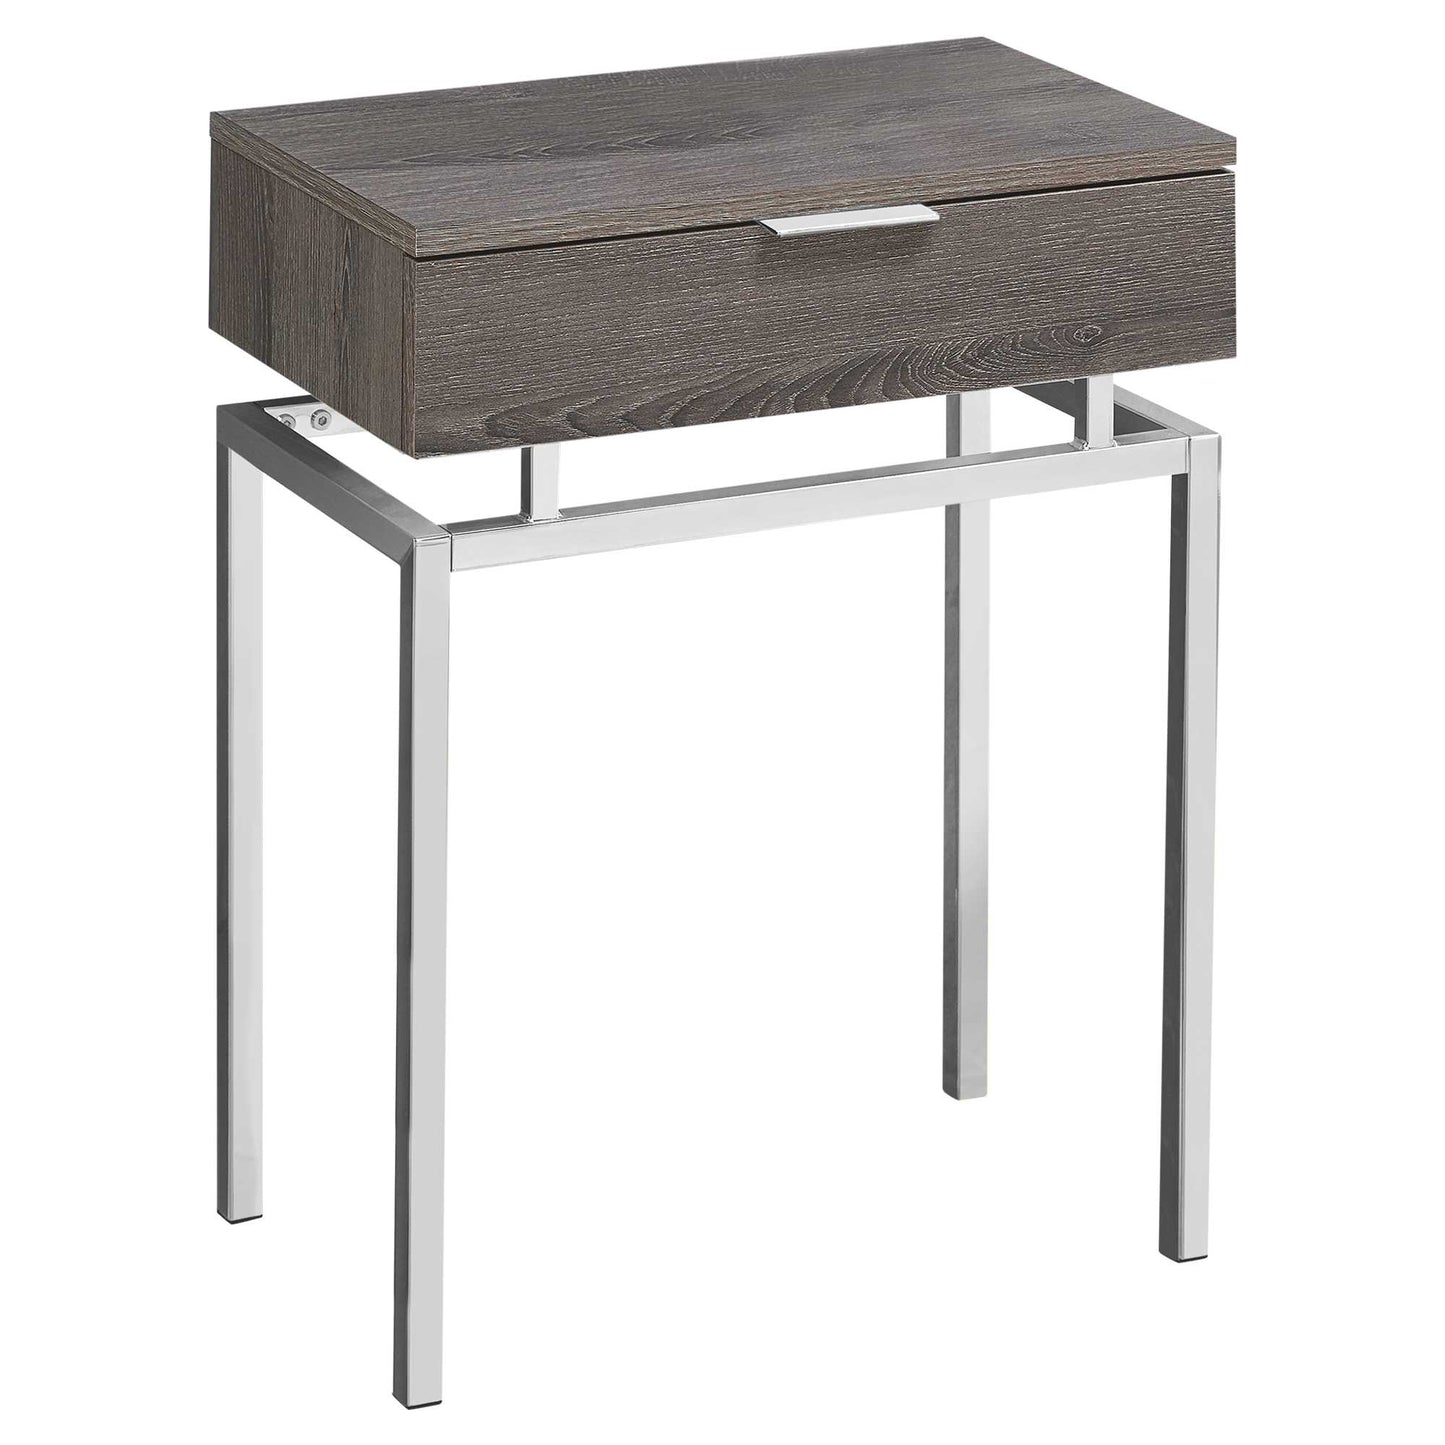 12.75" x 18.25" x 23" Dark Taupe Finish and Chrome Metal Accent Table